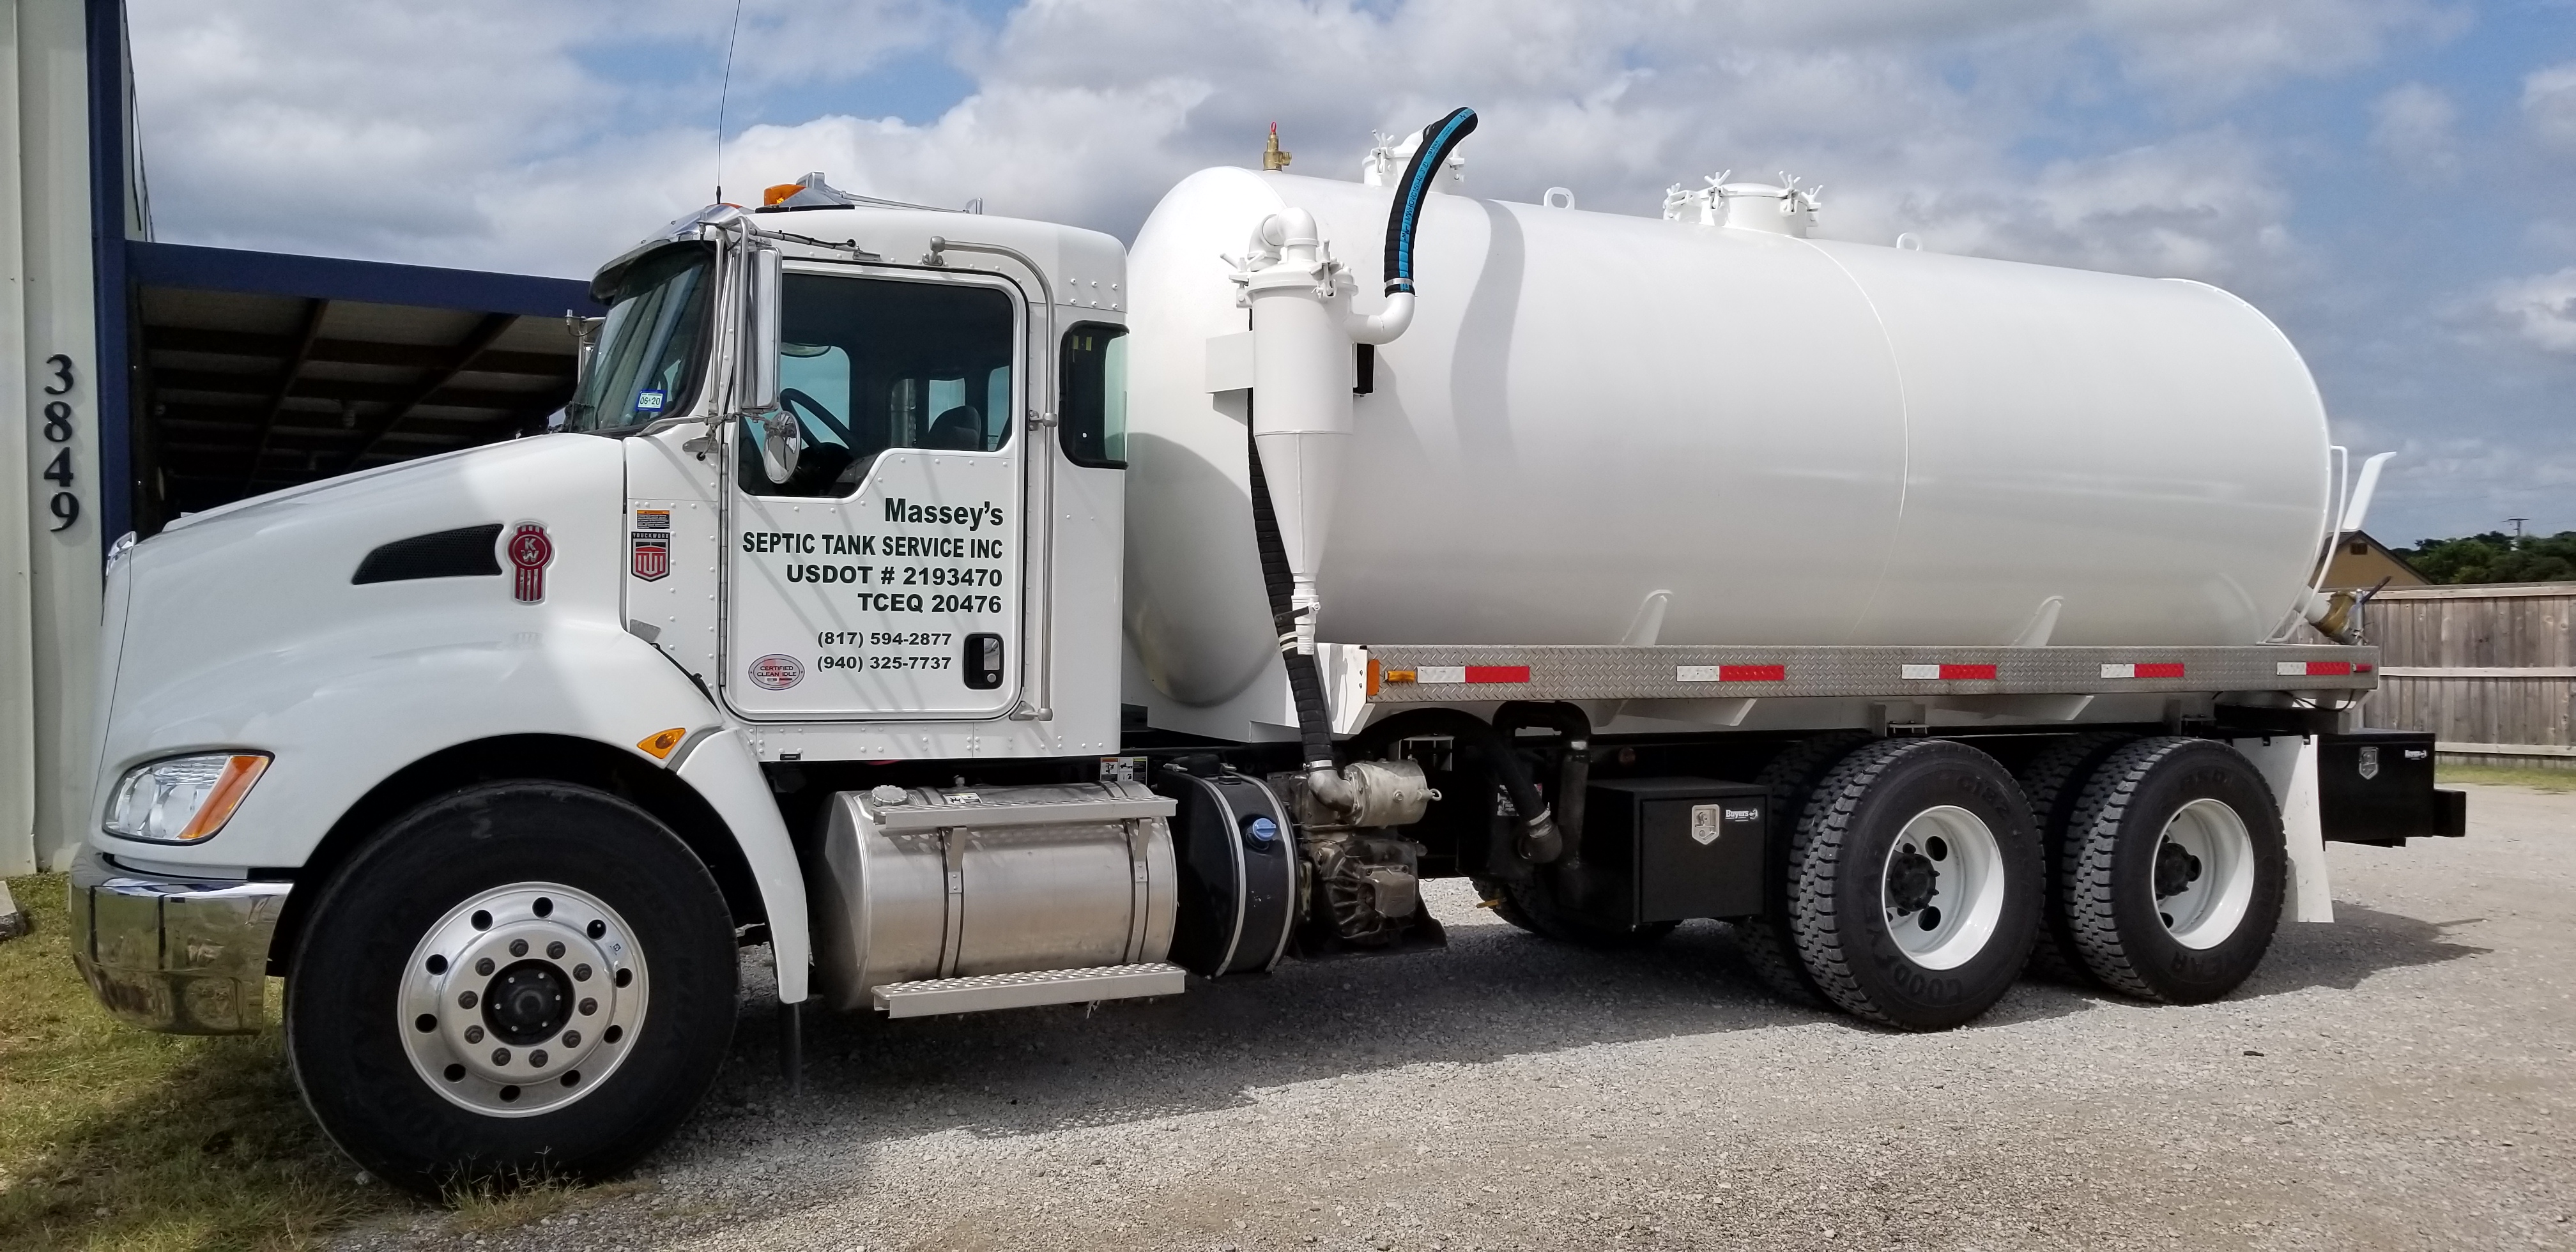 Vehicle Lettering - Massey's Septic Tank Service